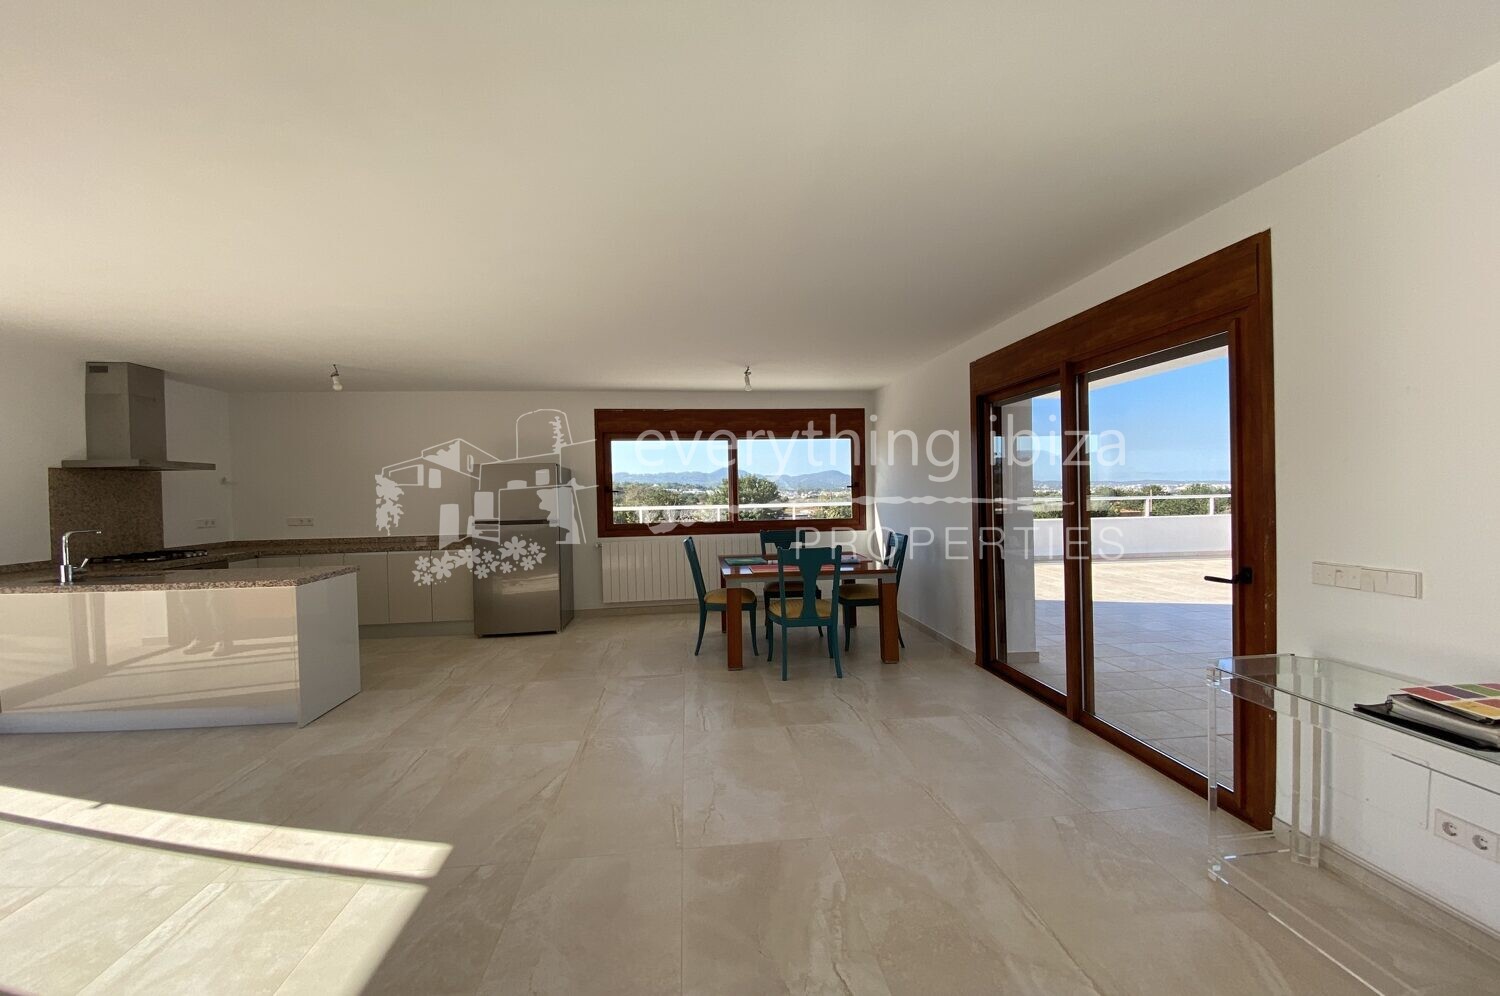 Beautiful Countryside Villa On Large Plot with Private Pool, ref. 1467, for sale in Ibiza by everything ibiza Properties